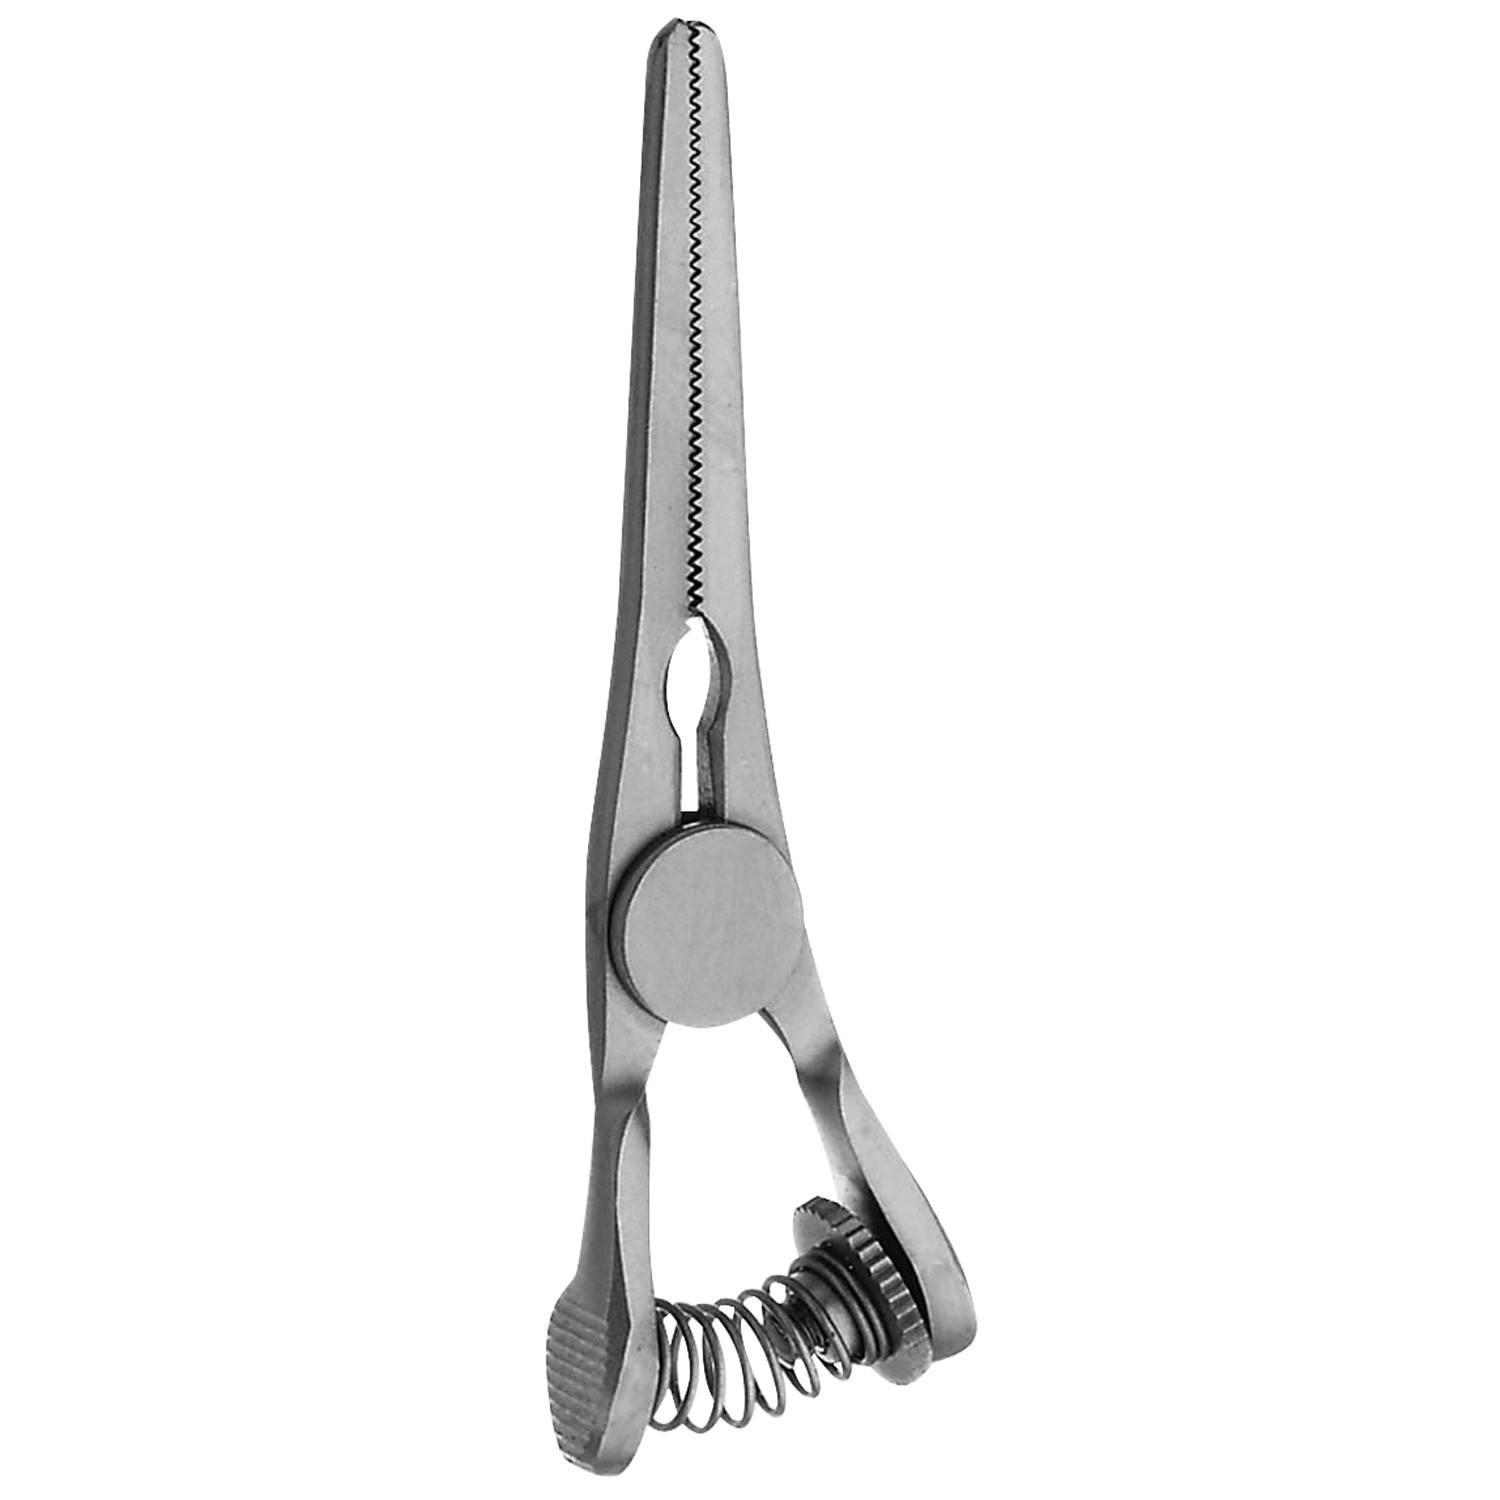 Cooley Bulldog Clamp, Spring Action, Adjustable Tension, Curved, Jaws 1.8 Cm, 1 3/4" (4.5 Cm)